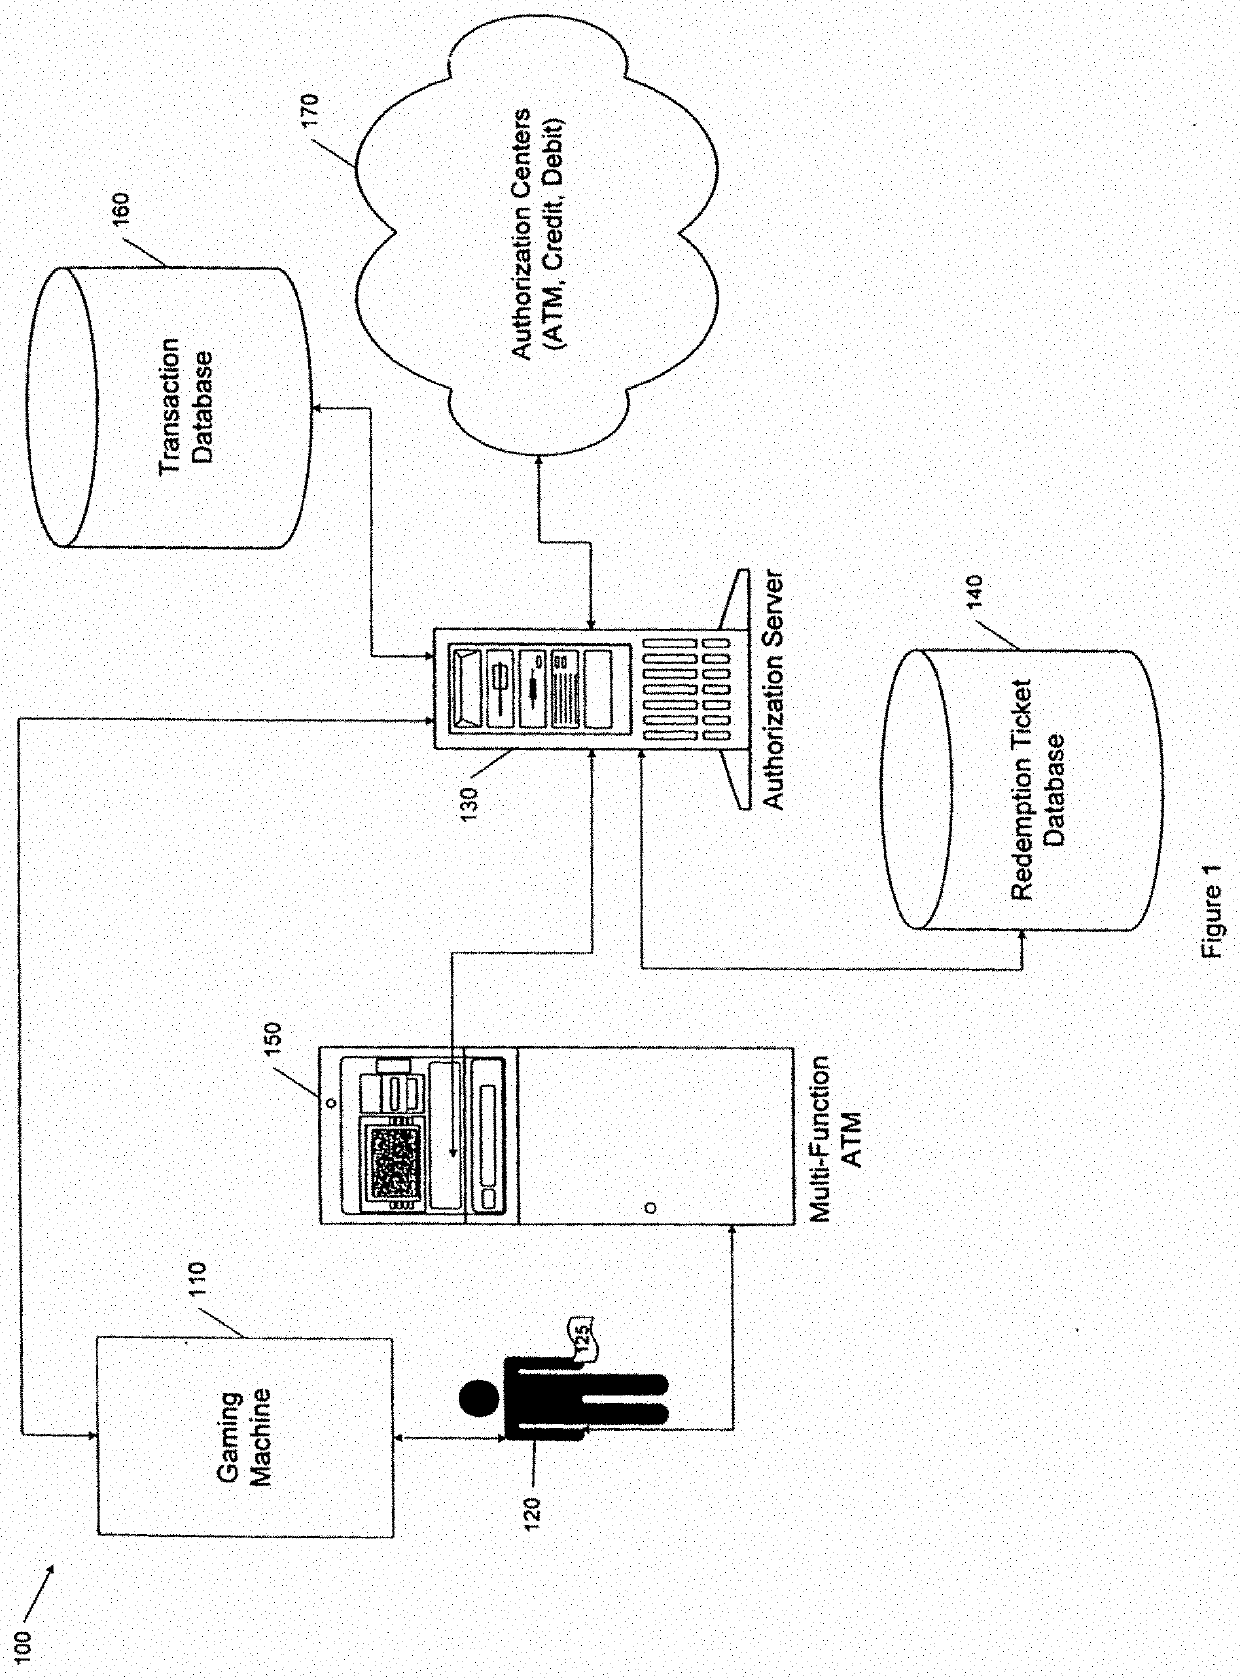 System and method for redeeming cashless gaming tickets to bank accounts via multi-function ATM